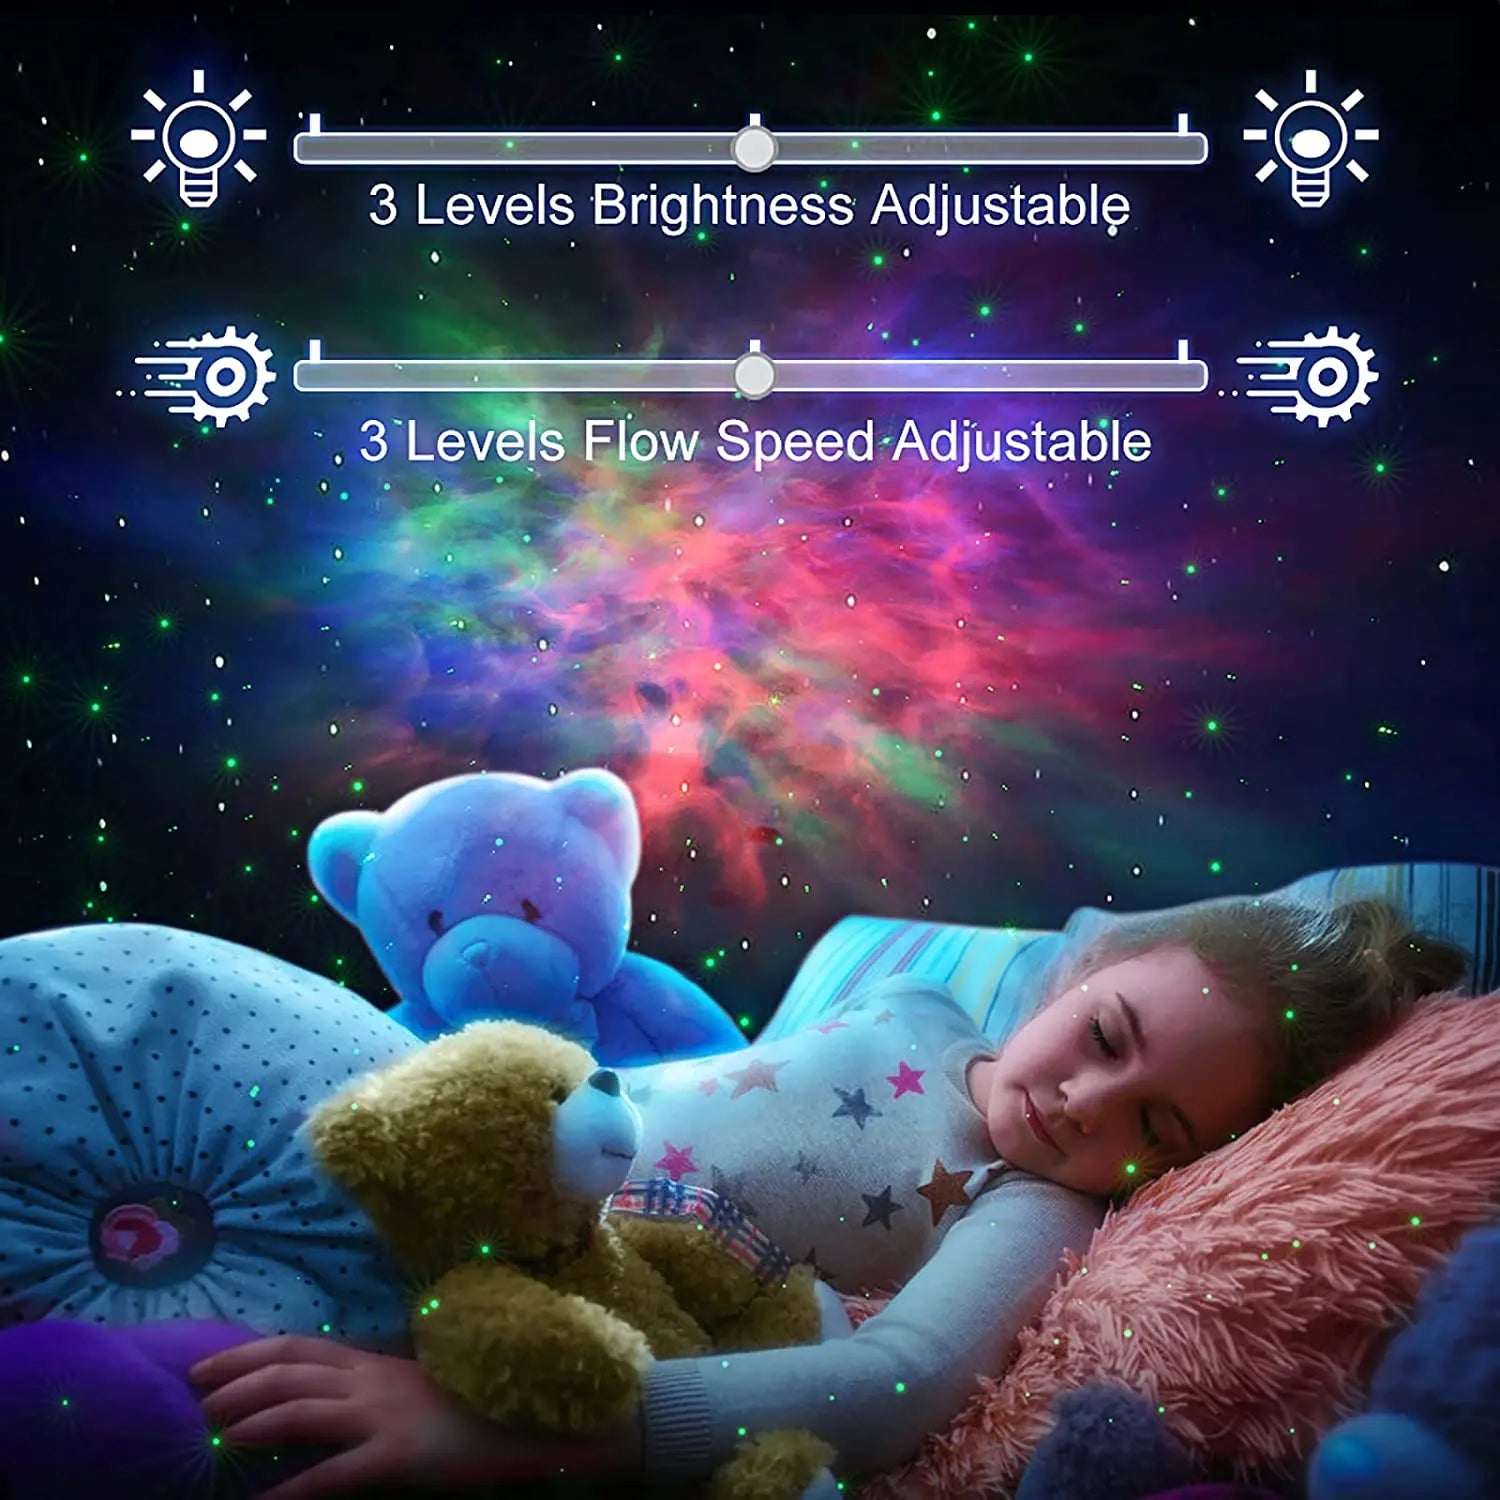 A young girl peacefully sleeping with a teddy bear under a Soulful Trading Galaxy Projector, showcasing brightness and flow speed adjustment features.